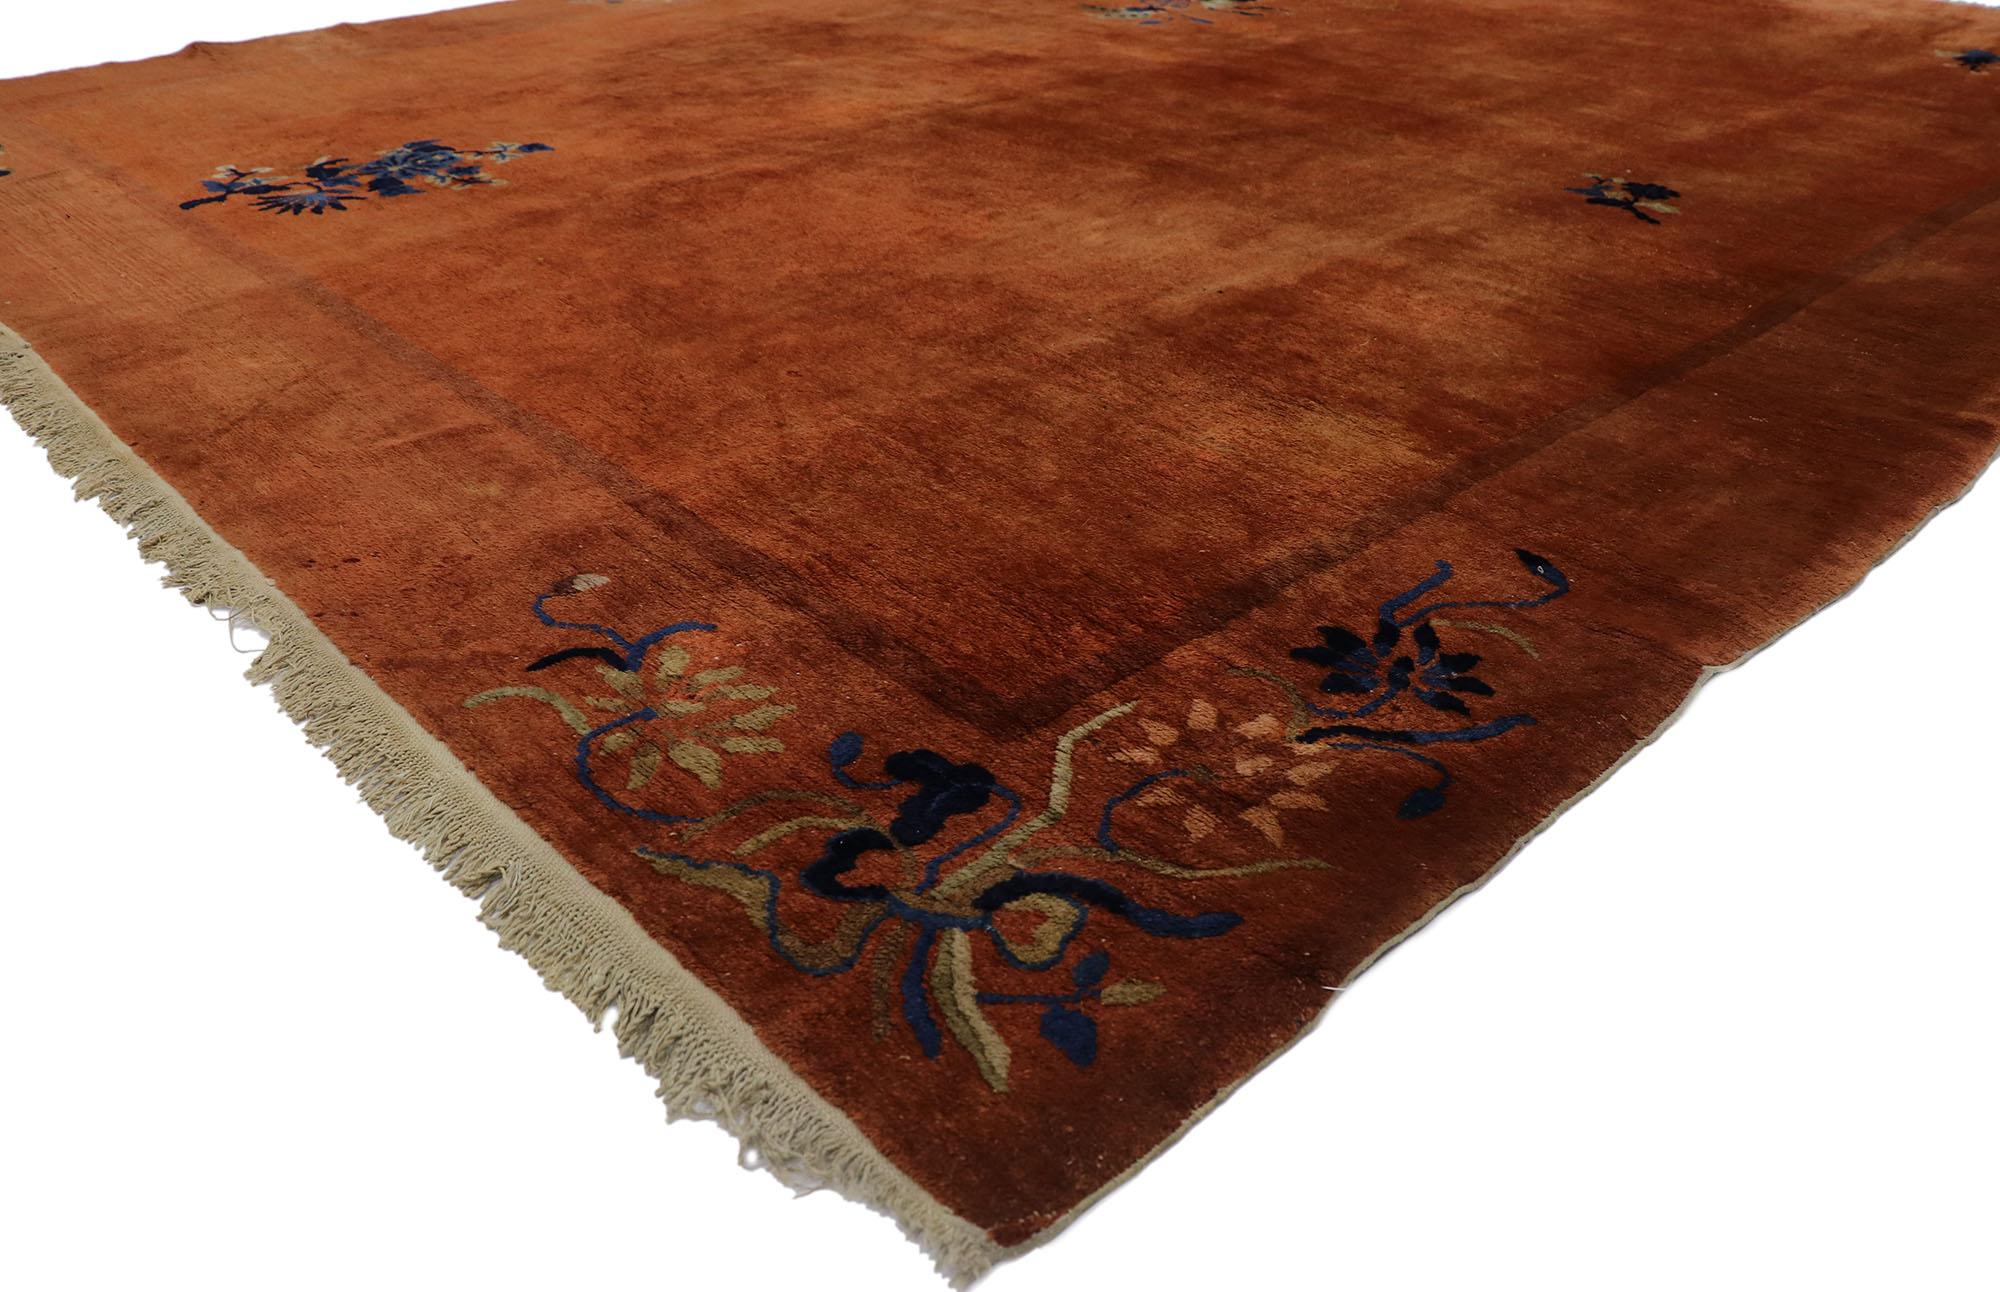 78127 antique Chinese Art Deco rug with Eclectic Jazz Age style 09'01 x 11'06. With its effortless beauty and rustic sensibility, this hand-knotted wool antique Chinese Art Deco rug will take on a curated lived-in look that feels timeless while